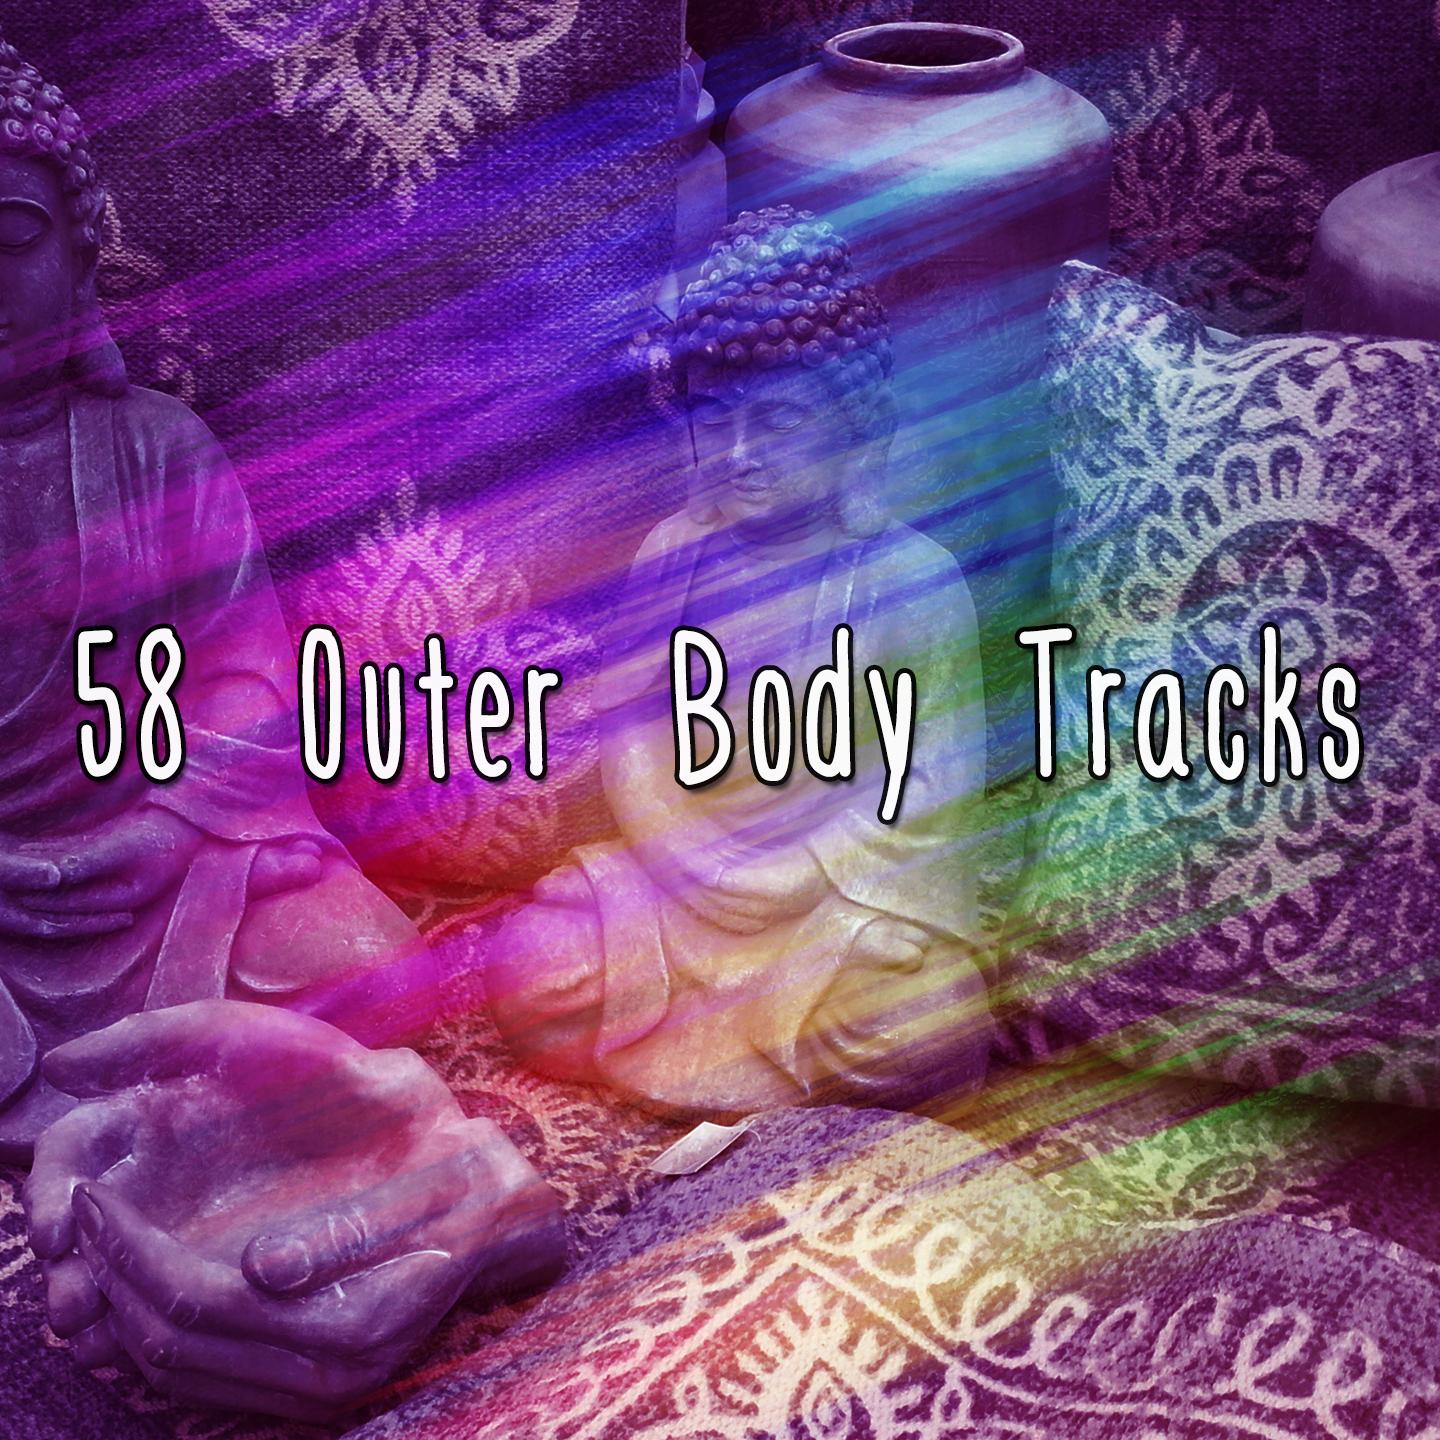 58 Outer Body Tracks